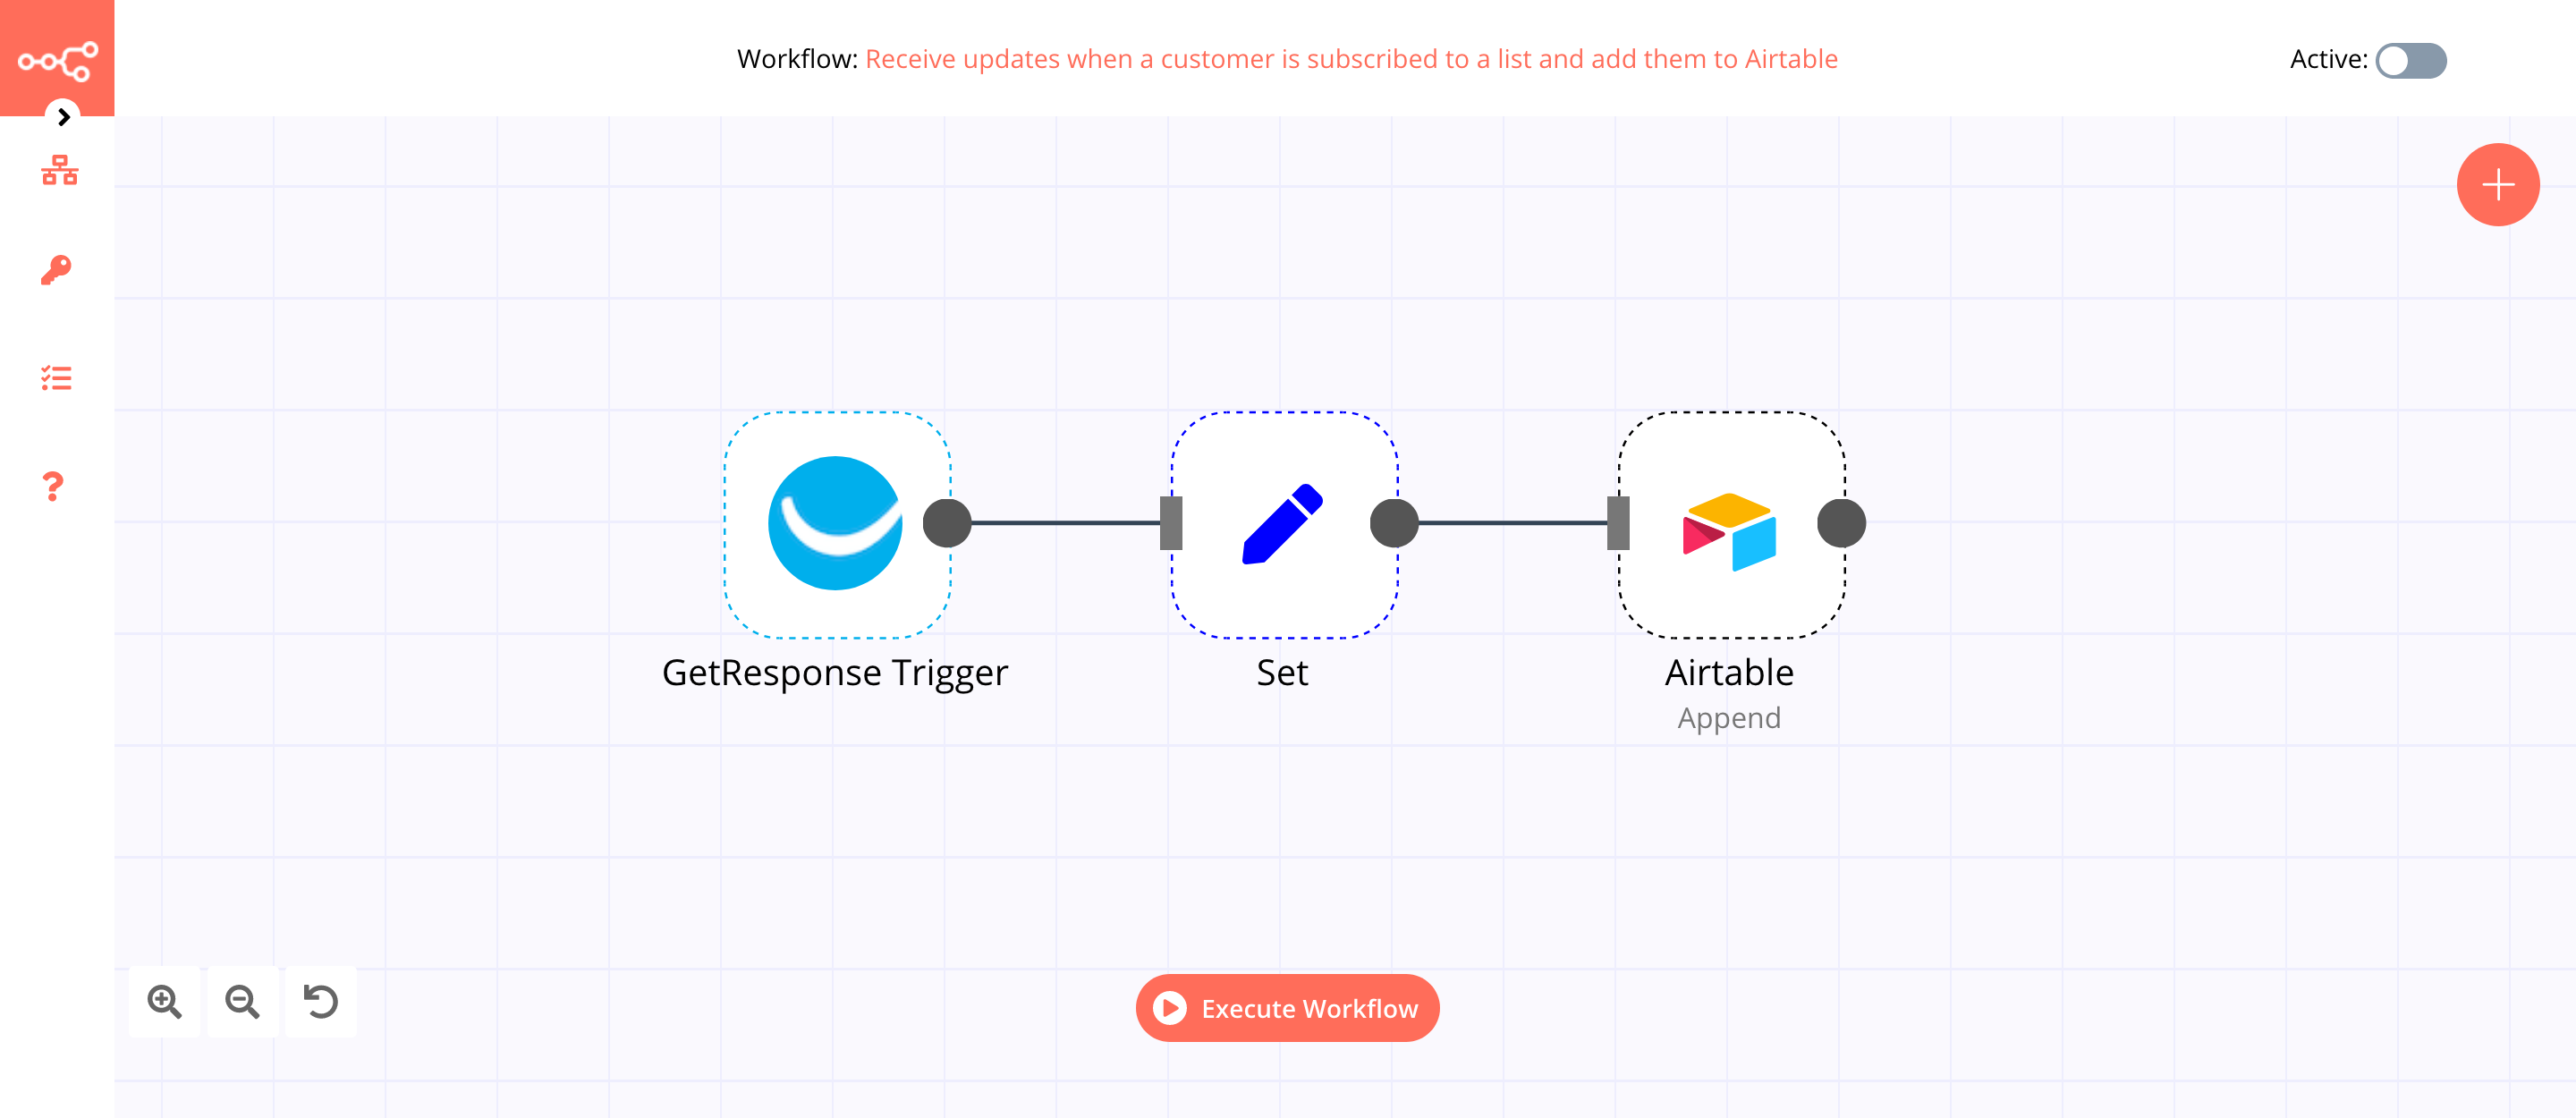 A workflow with the GetResponse Trigger node